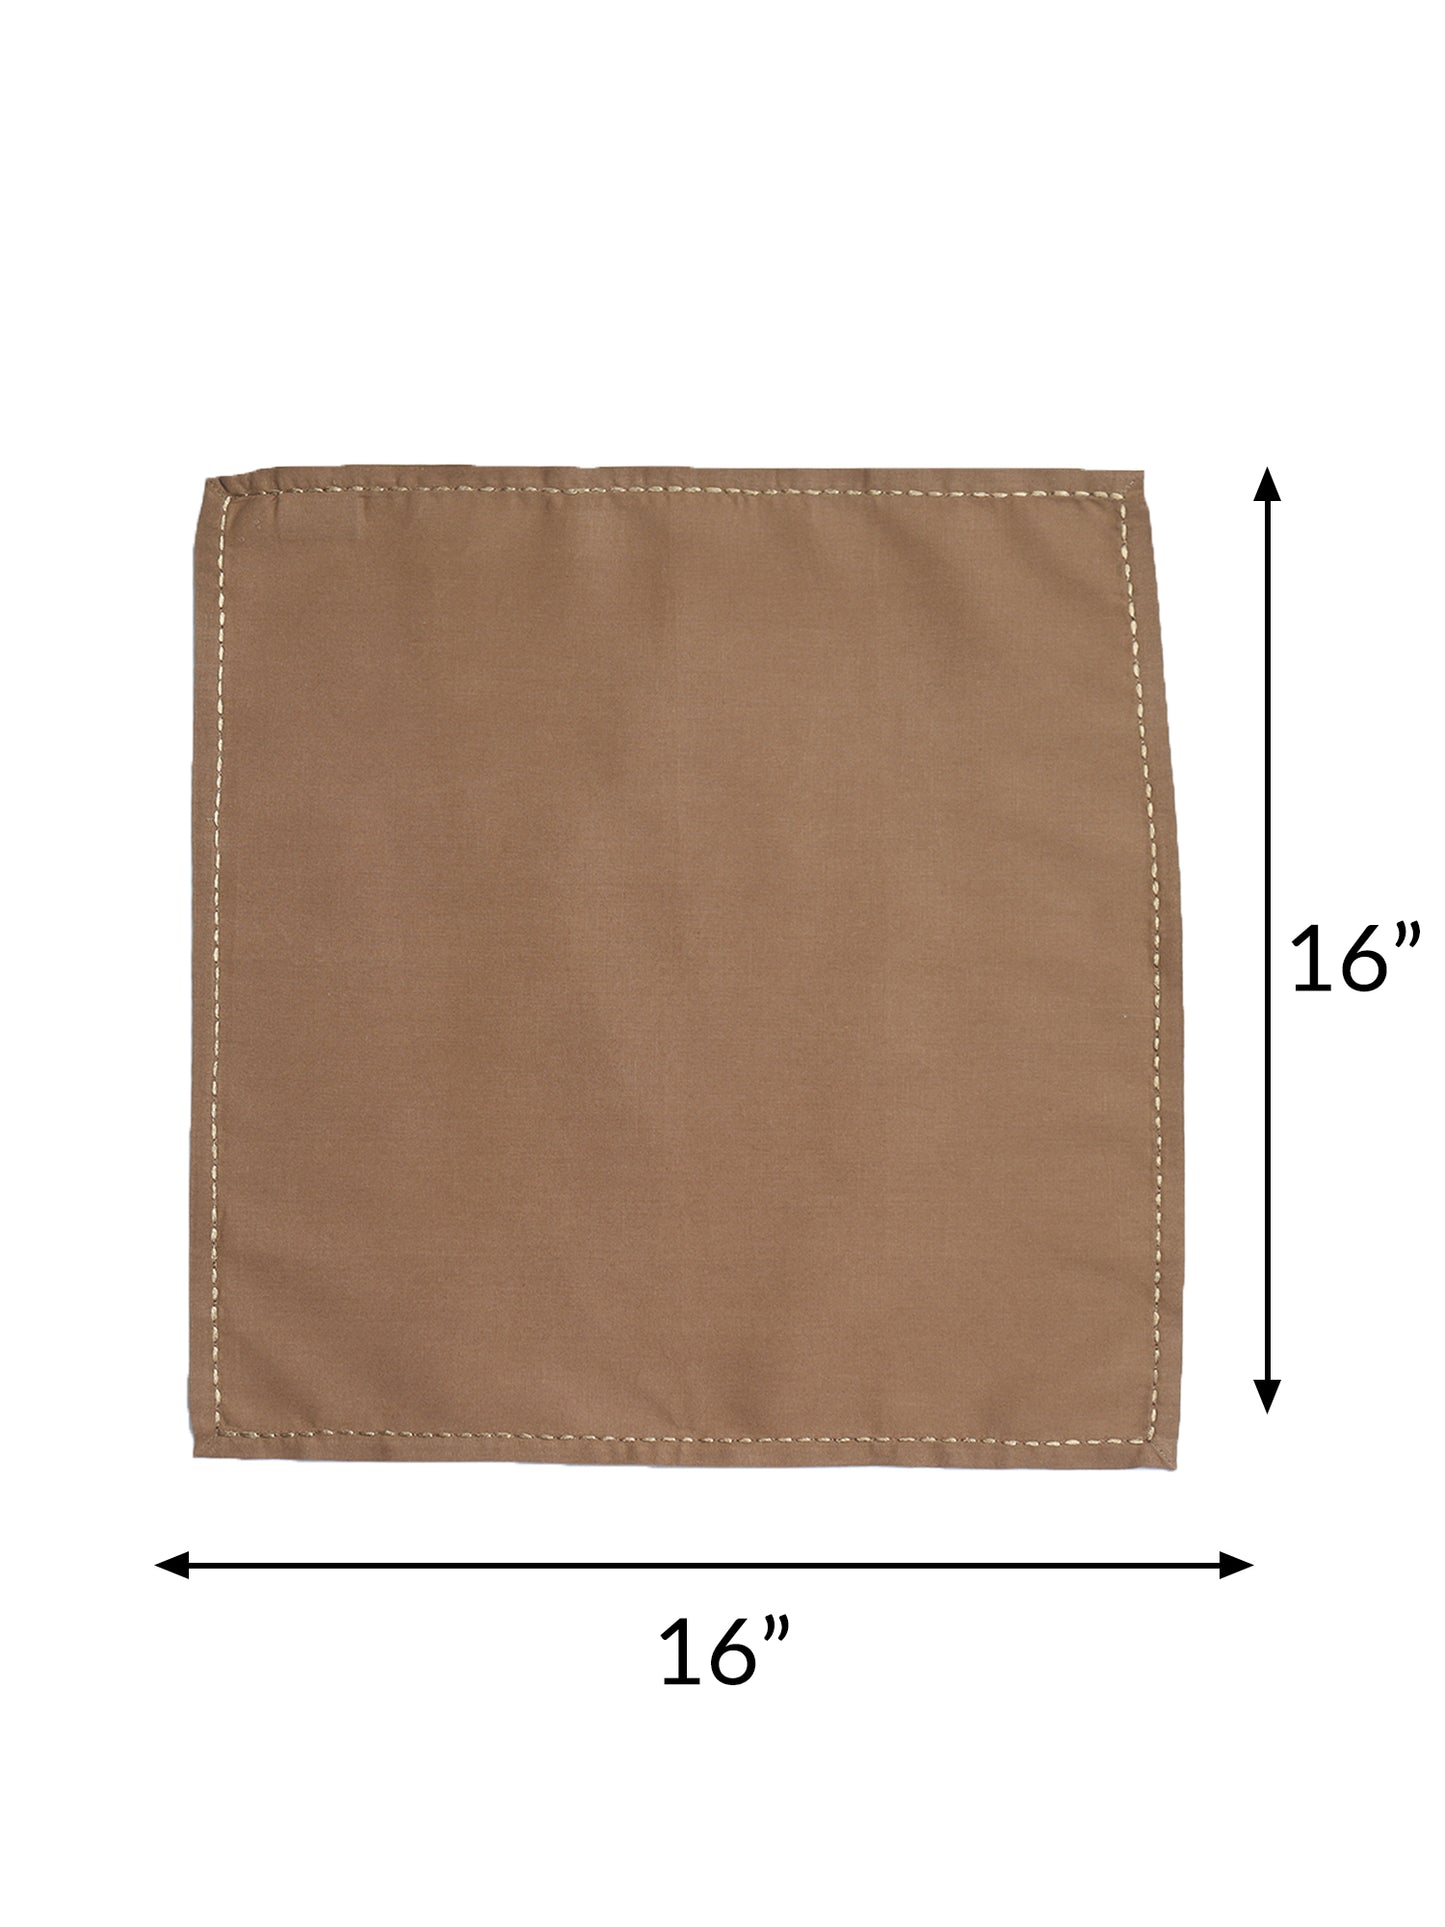 embroidered set of 6 dinner napkins in brown color - 16x16 inch